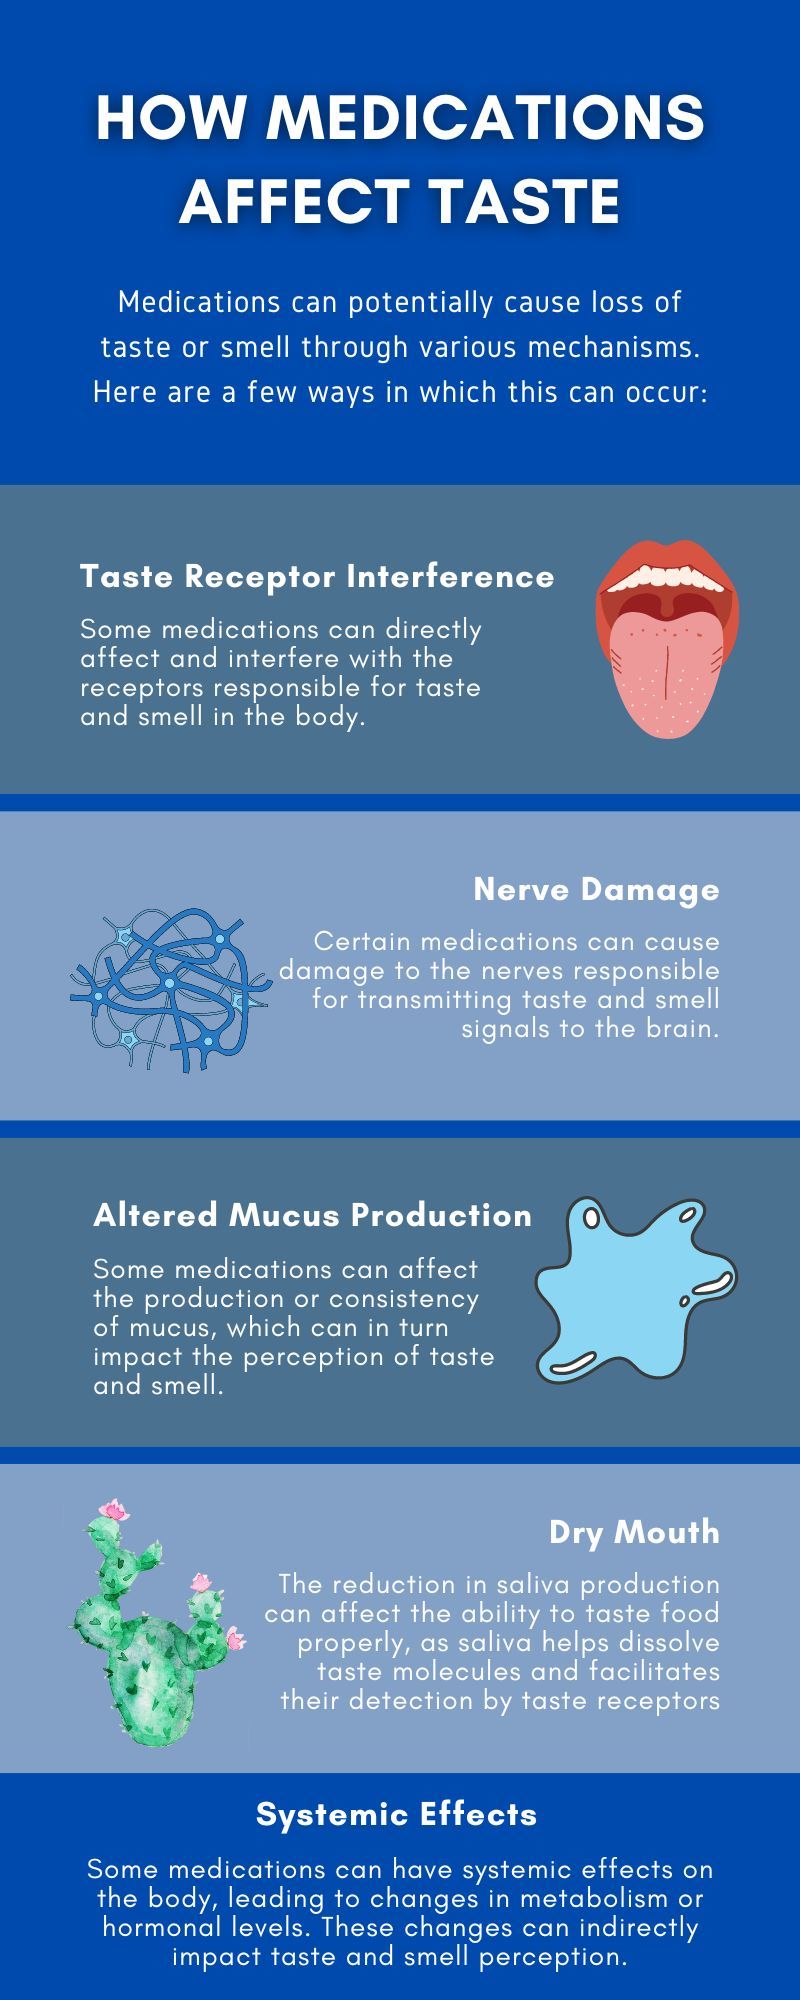 how medications affect taste infographic: Taste receptor interference, nerve damage, altered mucus production, dry mouth, and systemic effects.